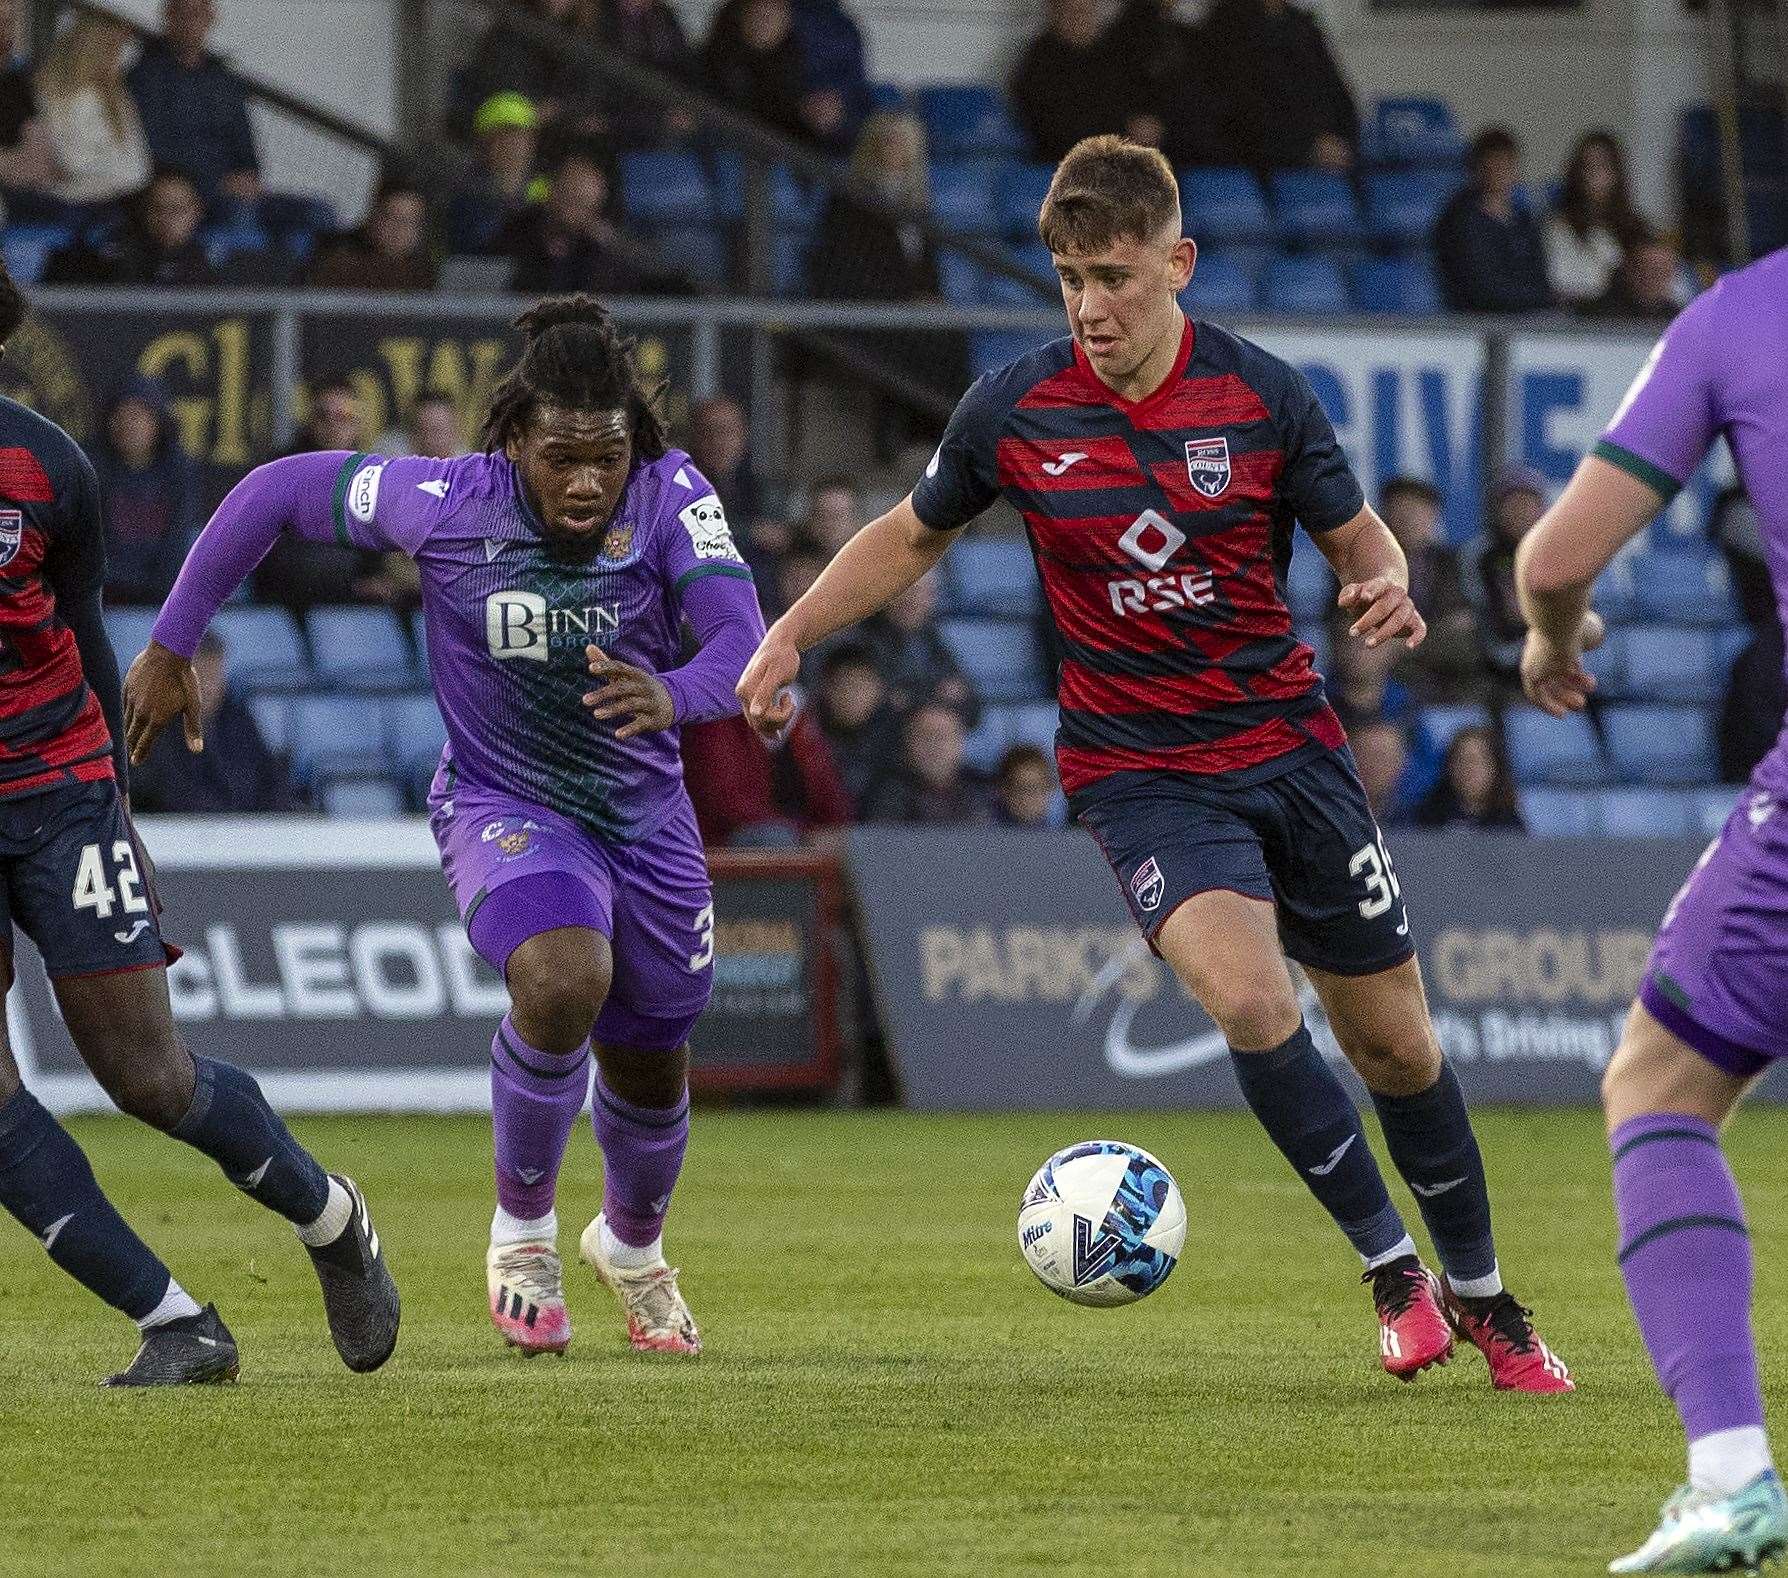 Ross County's Dylan Smith gets past St.Johnstone's Daniel Phillips.